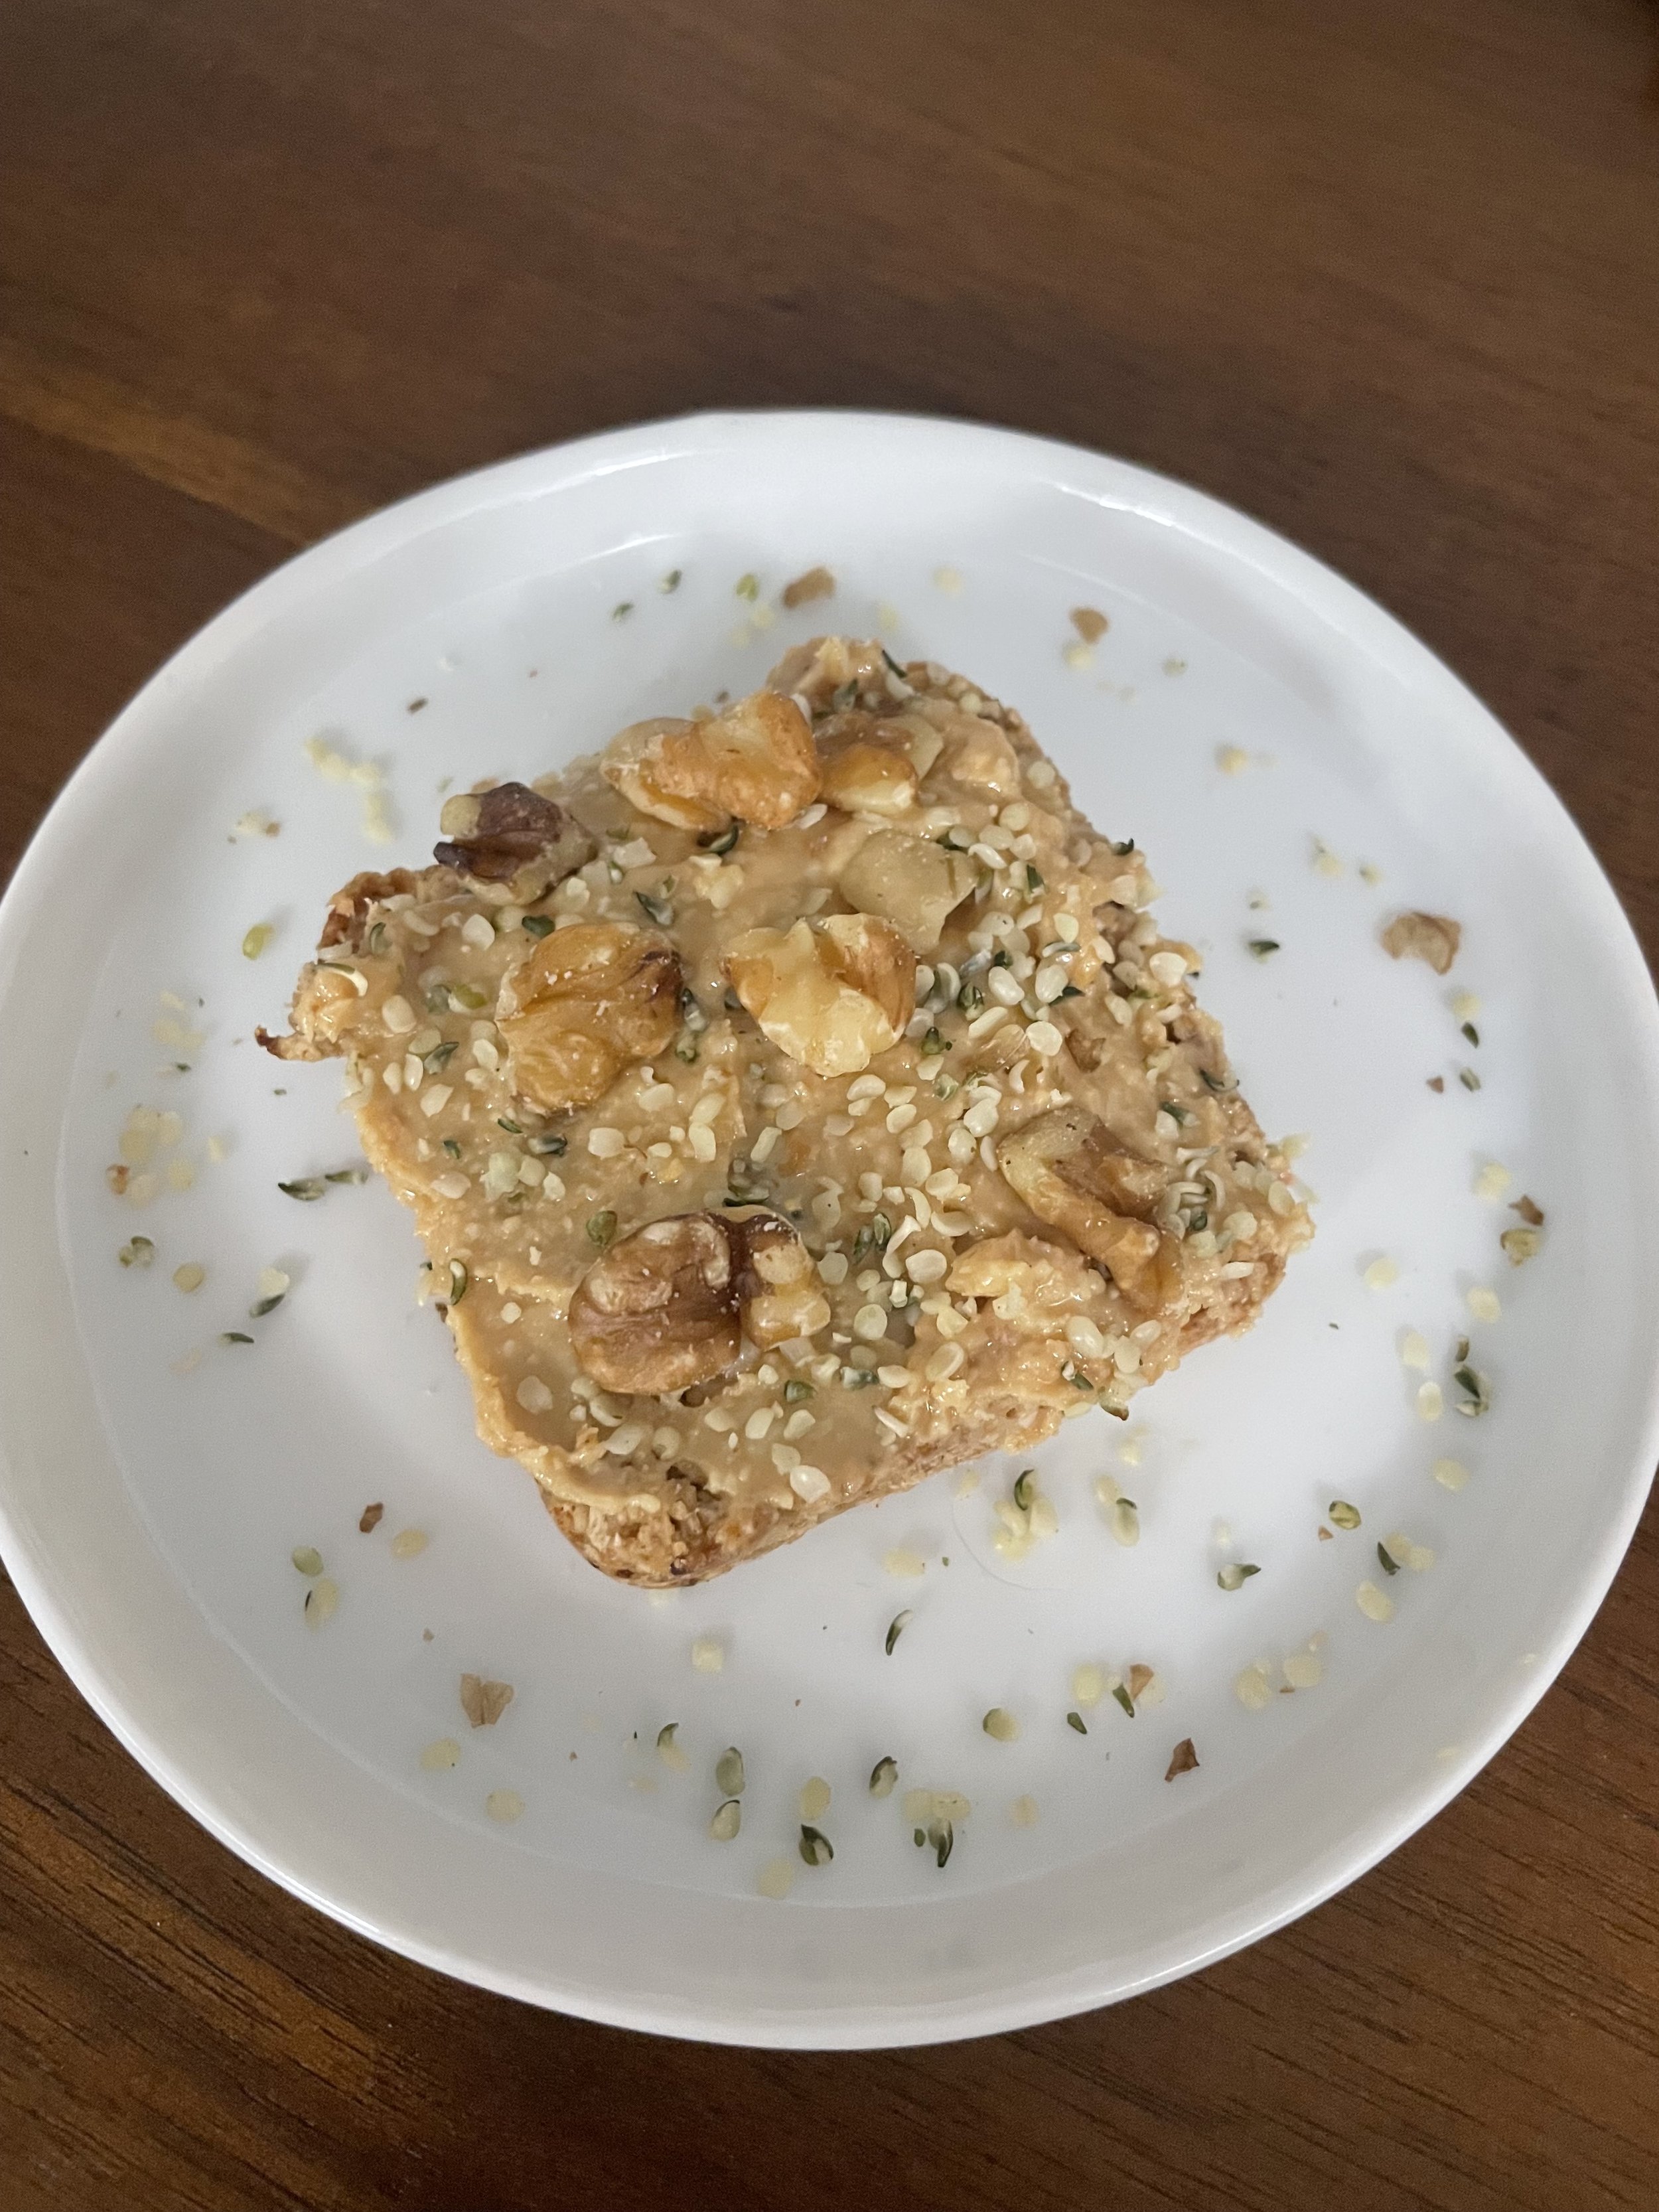 Topped with nut butter and extra nuts and seeds for a snack